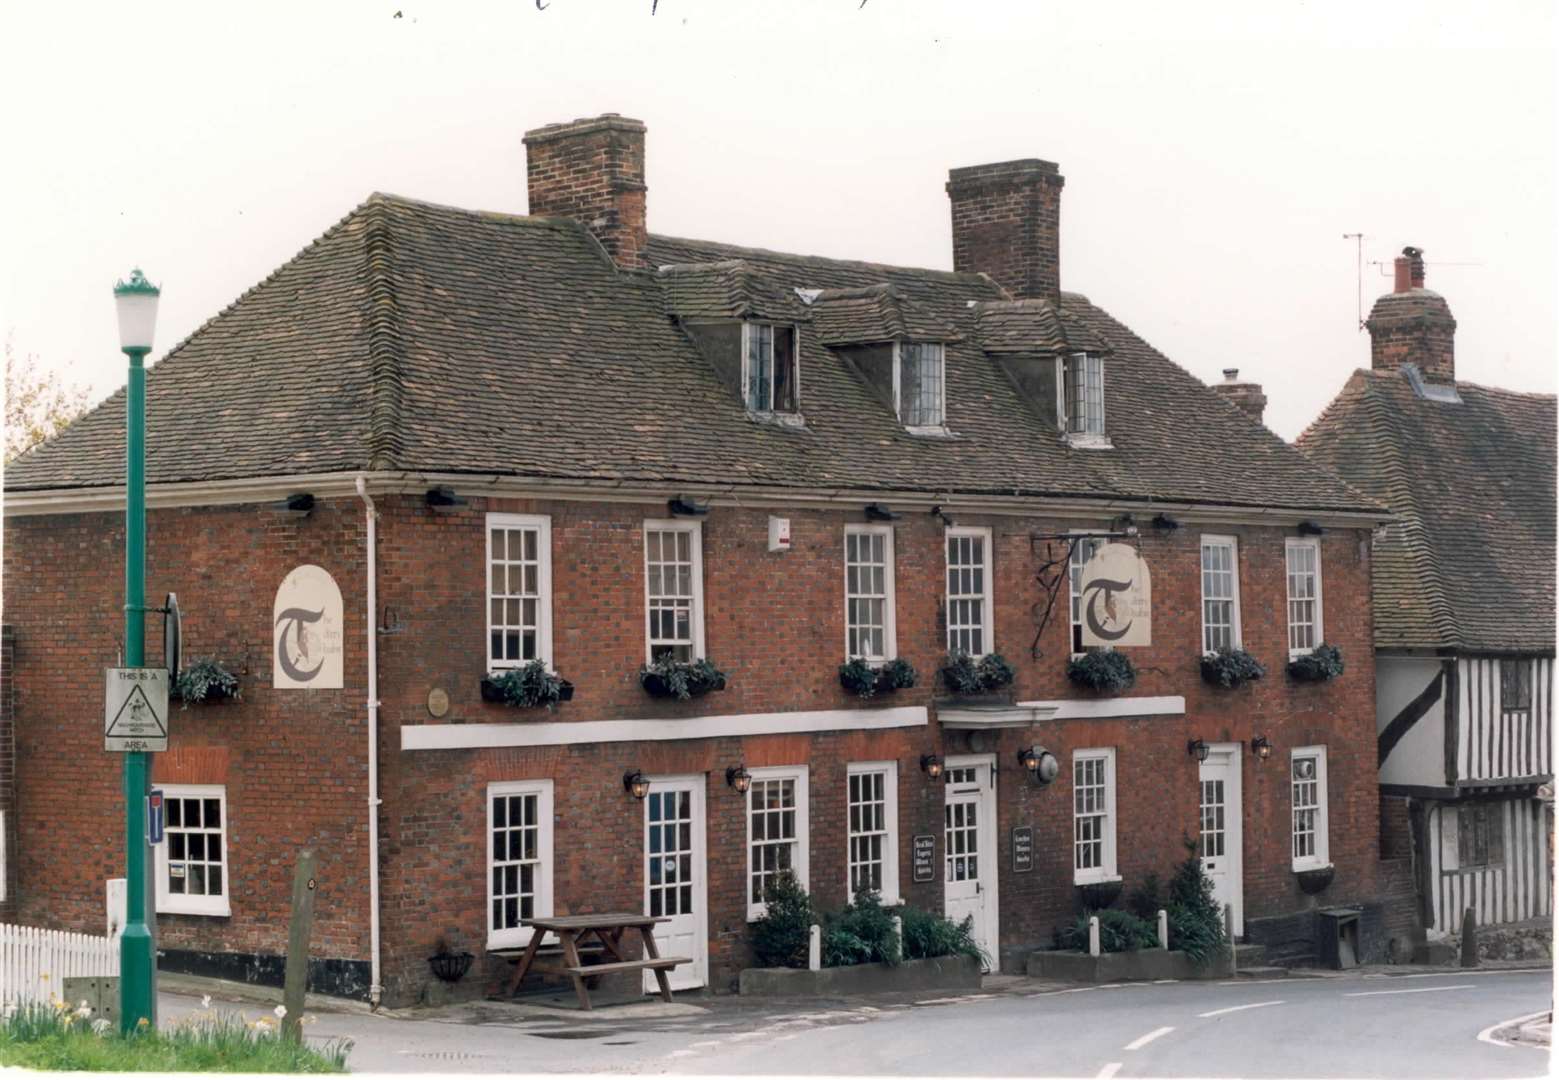 The Dirty Habit public house, Hollingbourne. File pic dated 1996